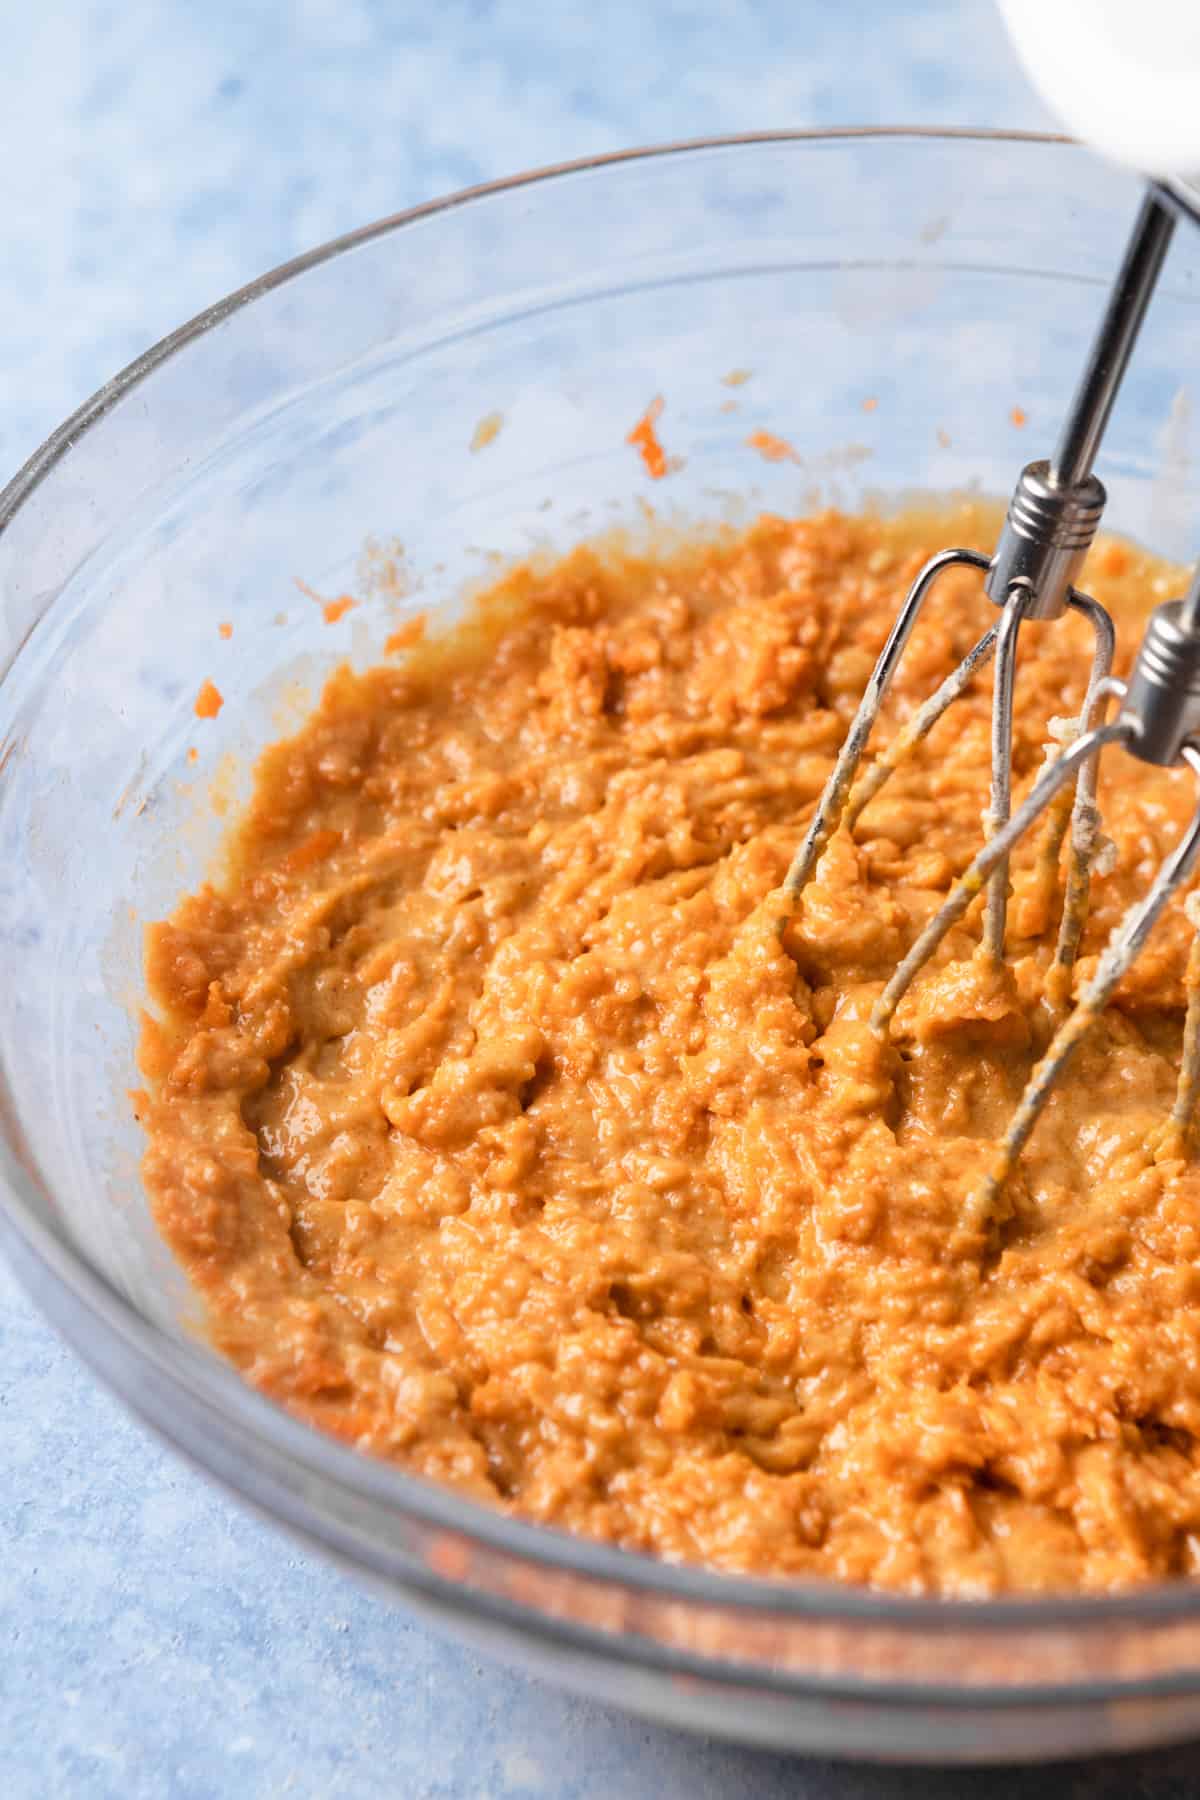 Mixing carrots into cake batter.